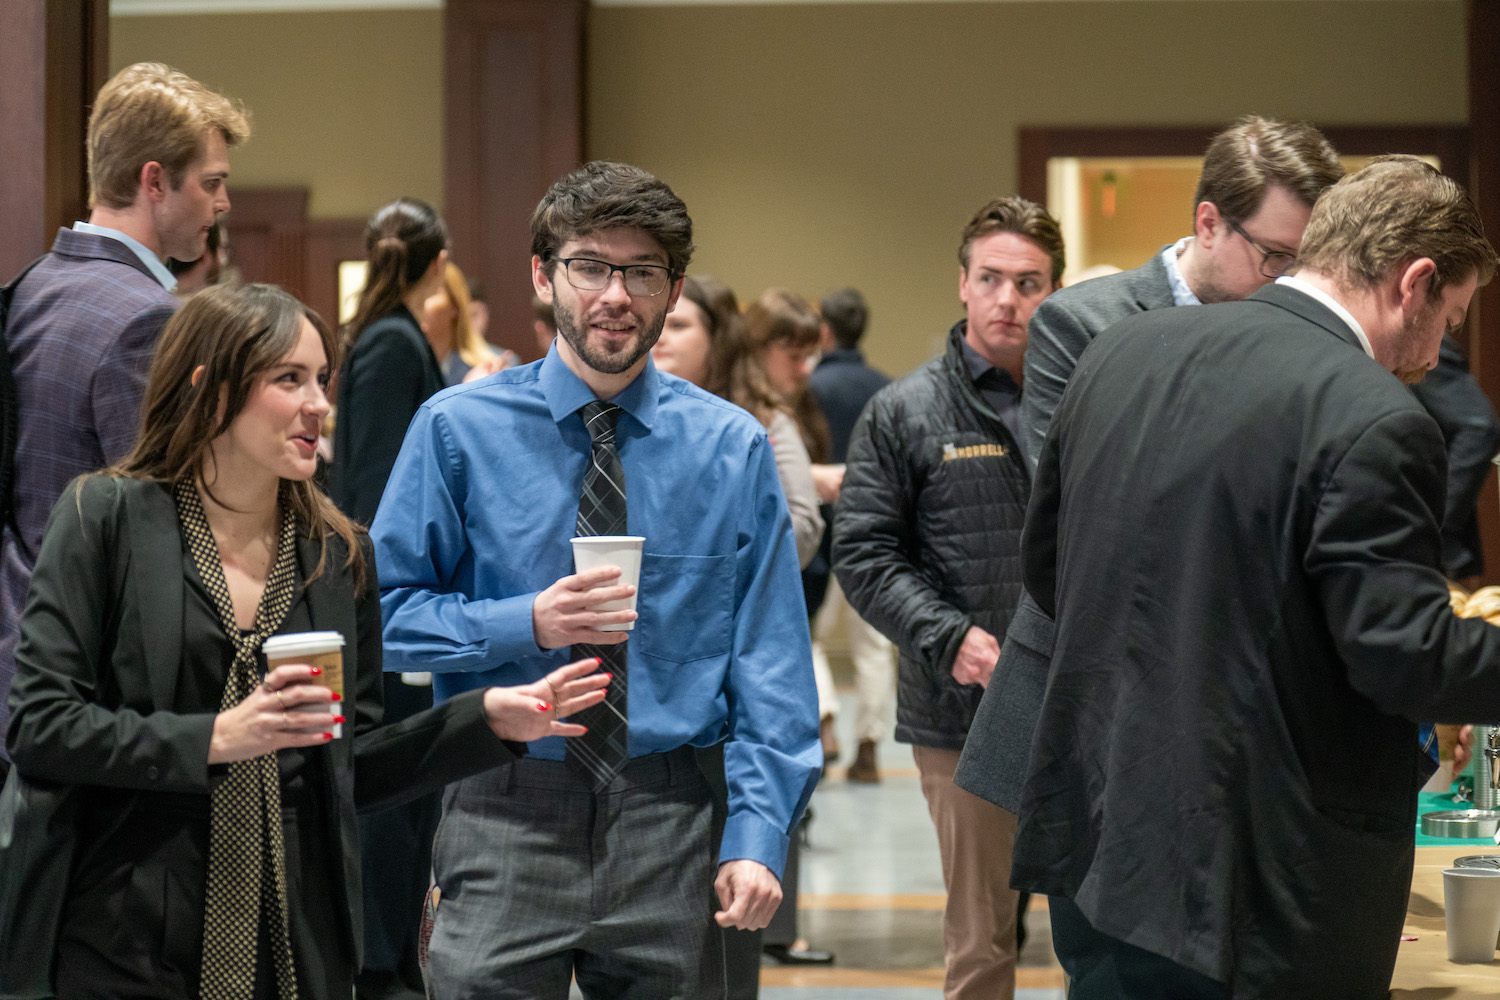 Students at law journal symposium